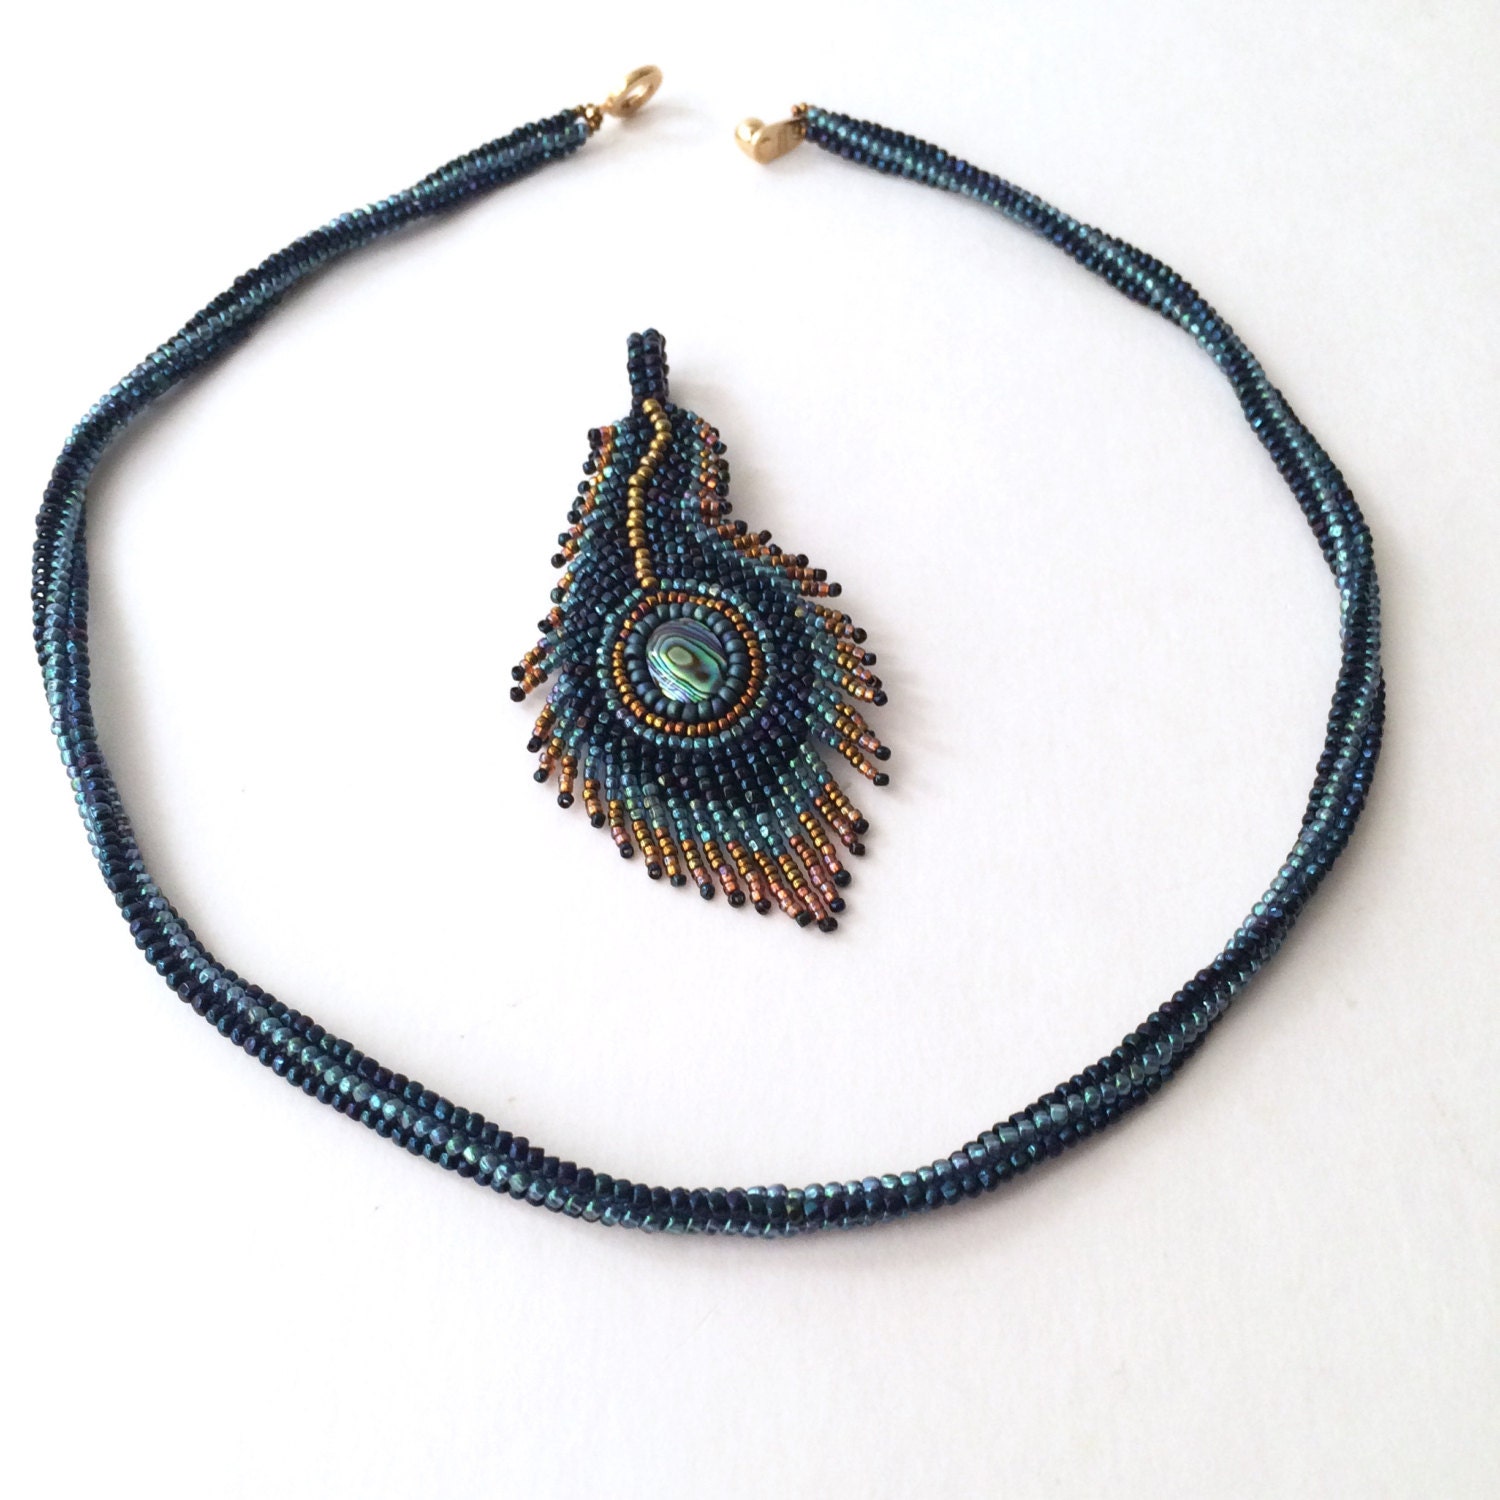 Peacock feather bead embroidery necklace with paua cabochon